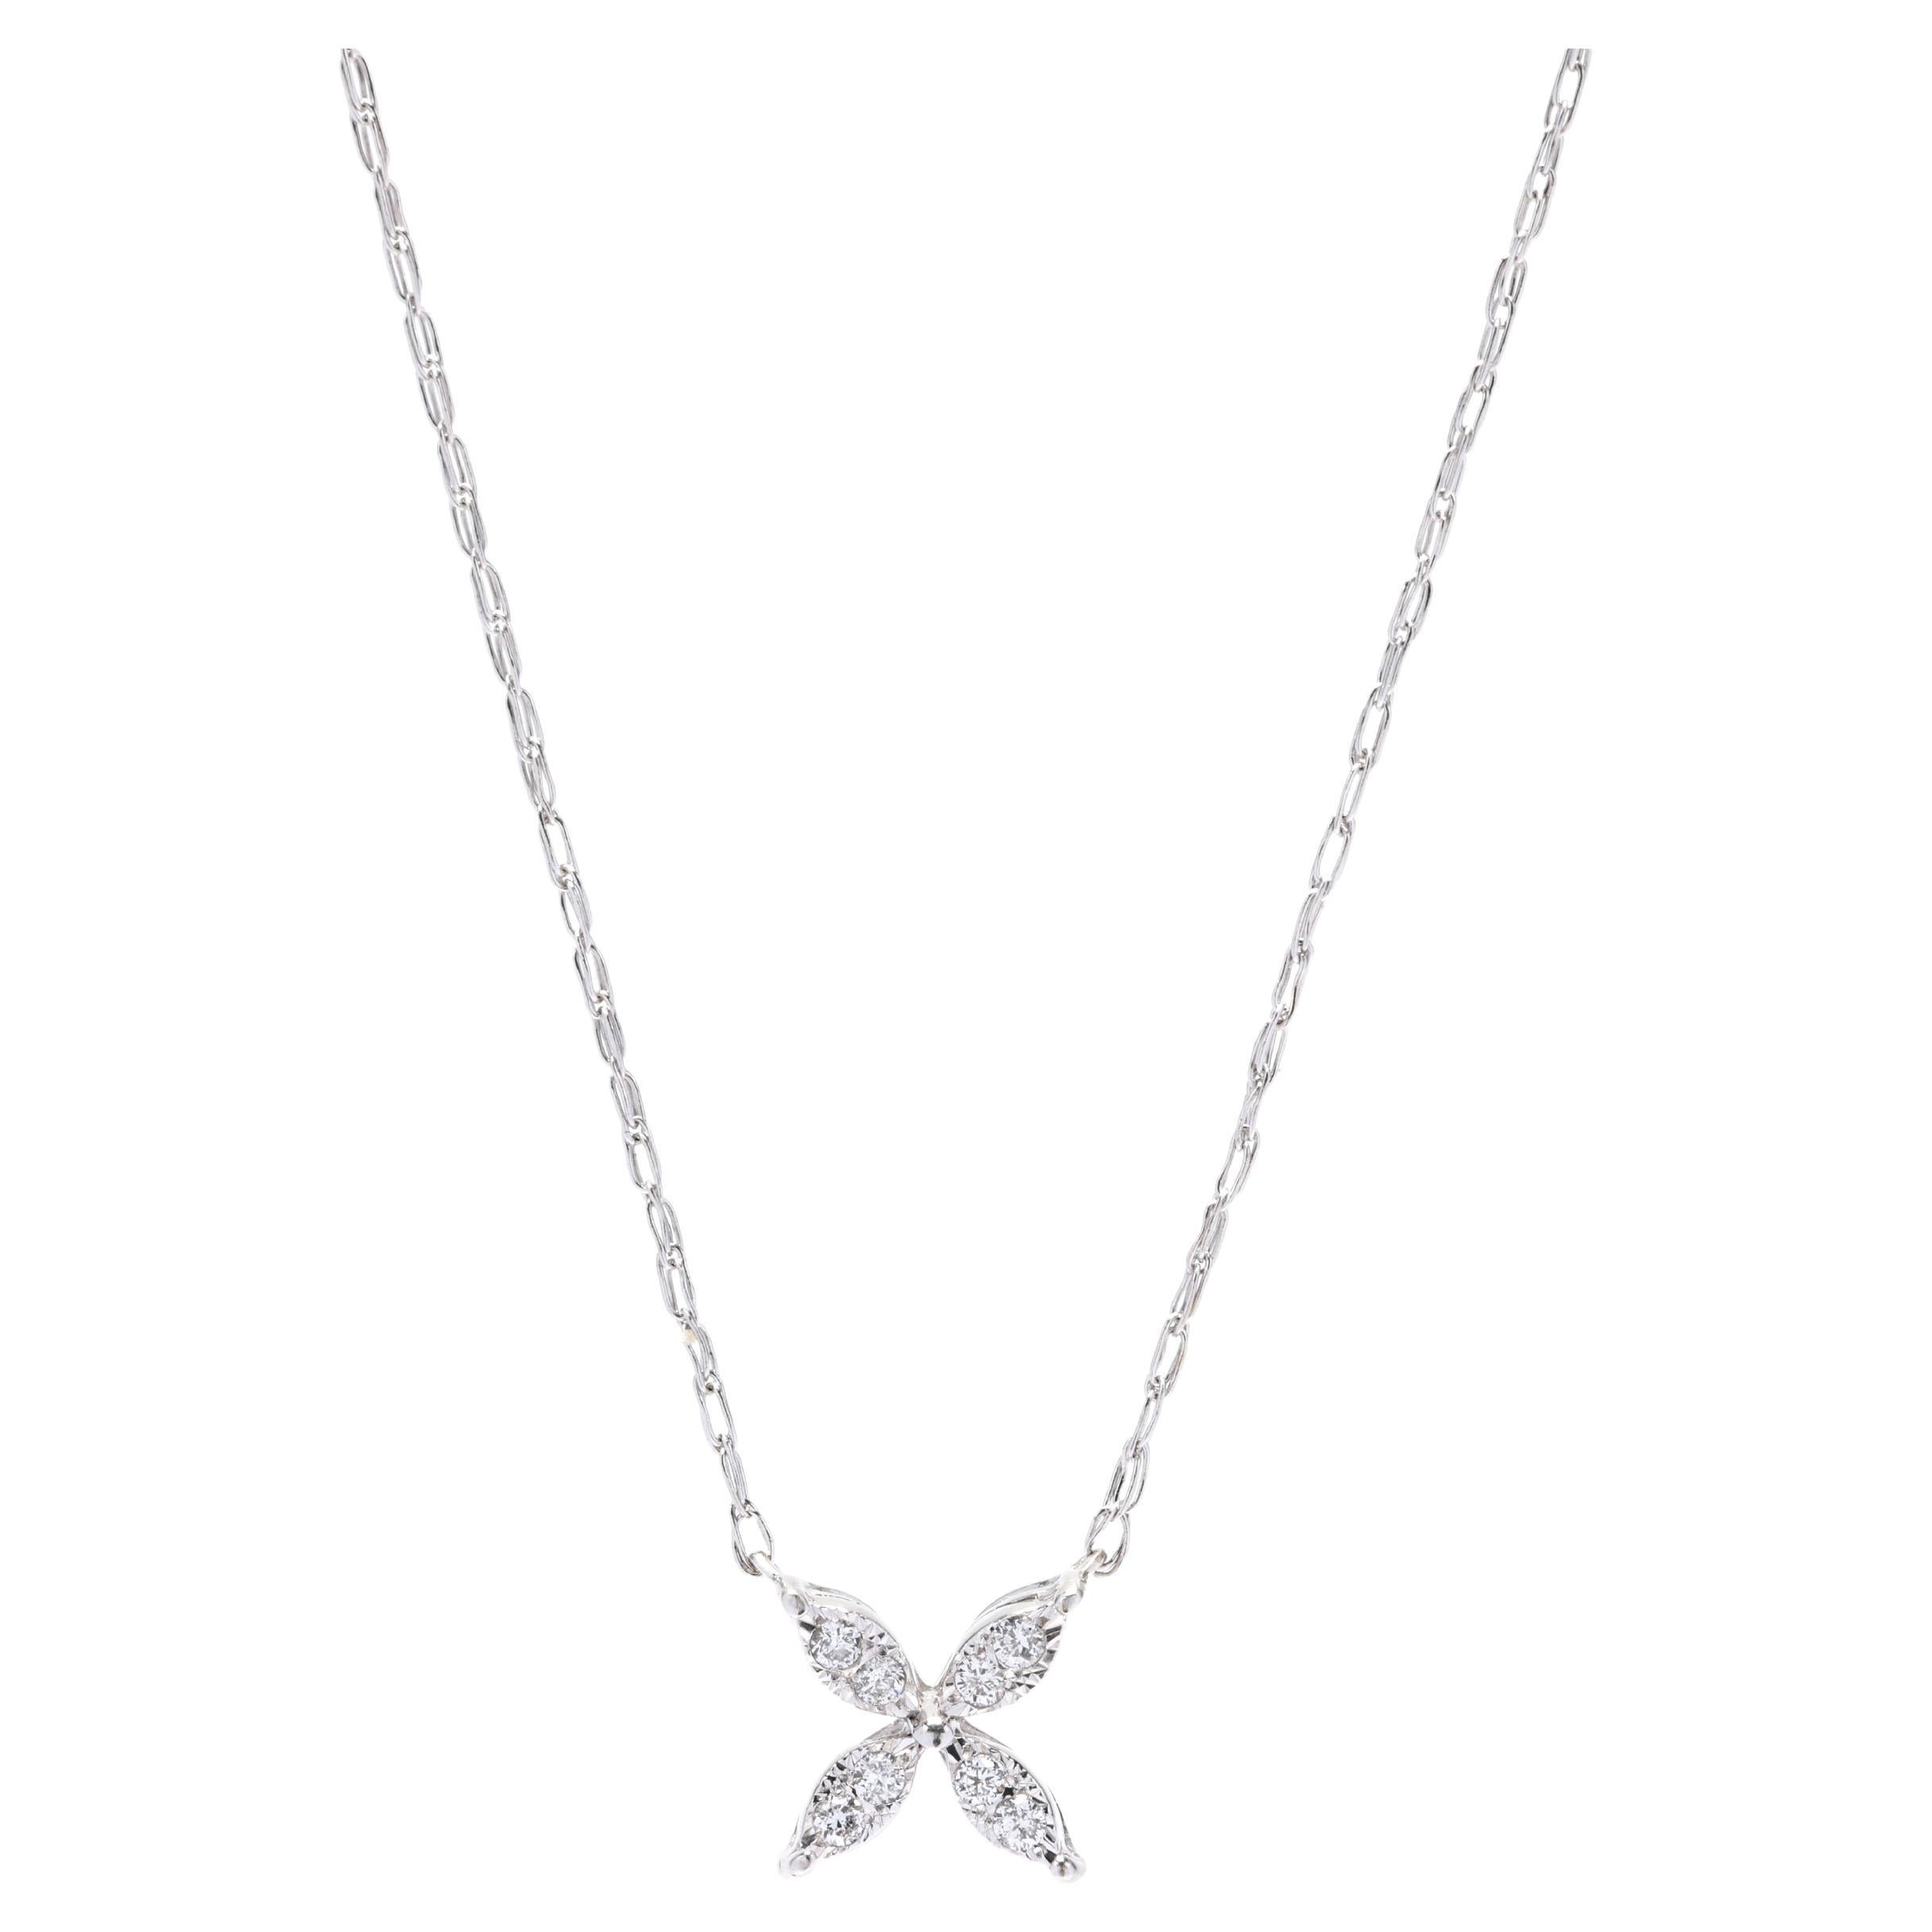 0.06 ctw Diamond Flower Necklace, 14kt White Gold, Length 18 Inches